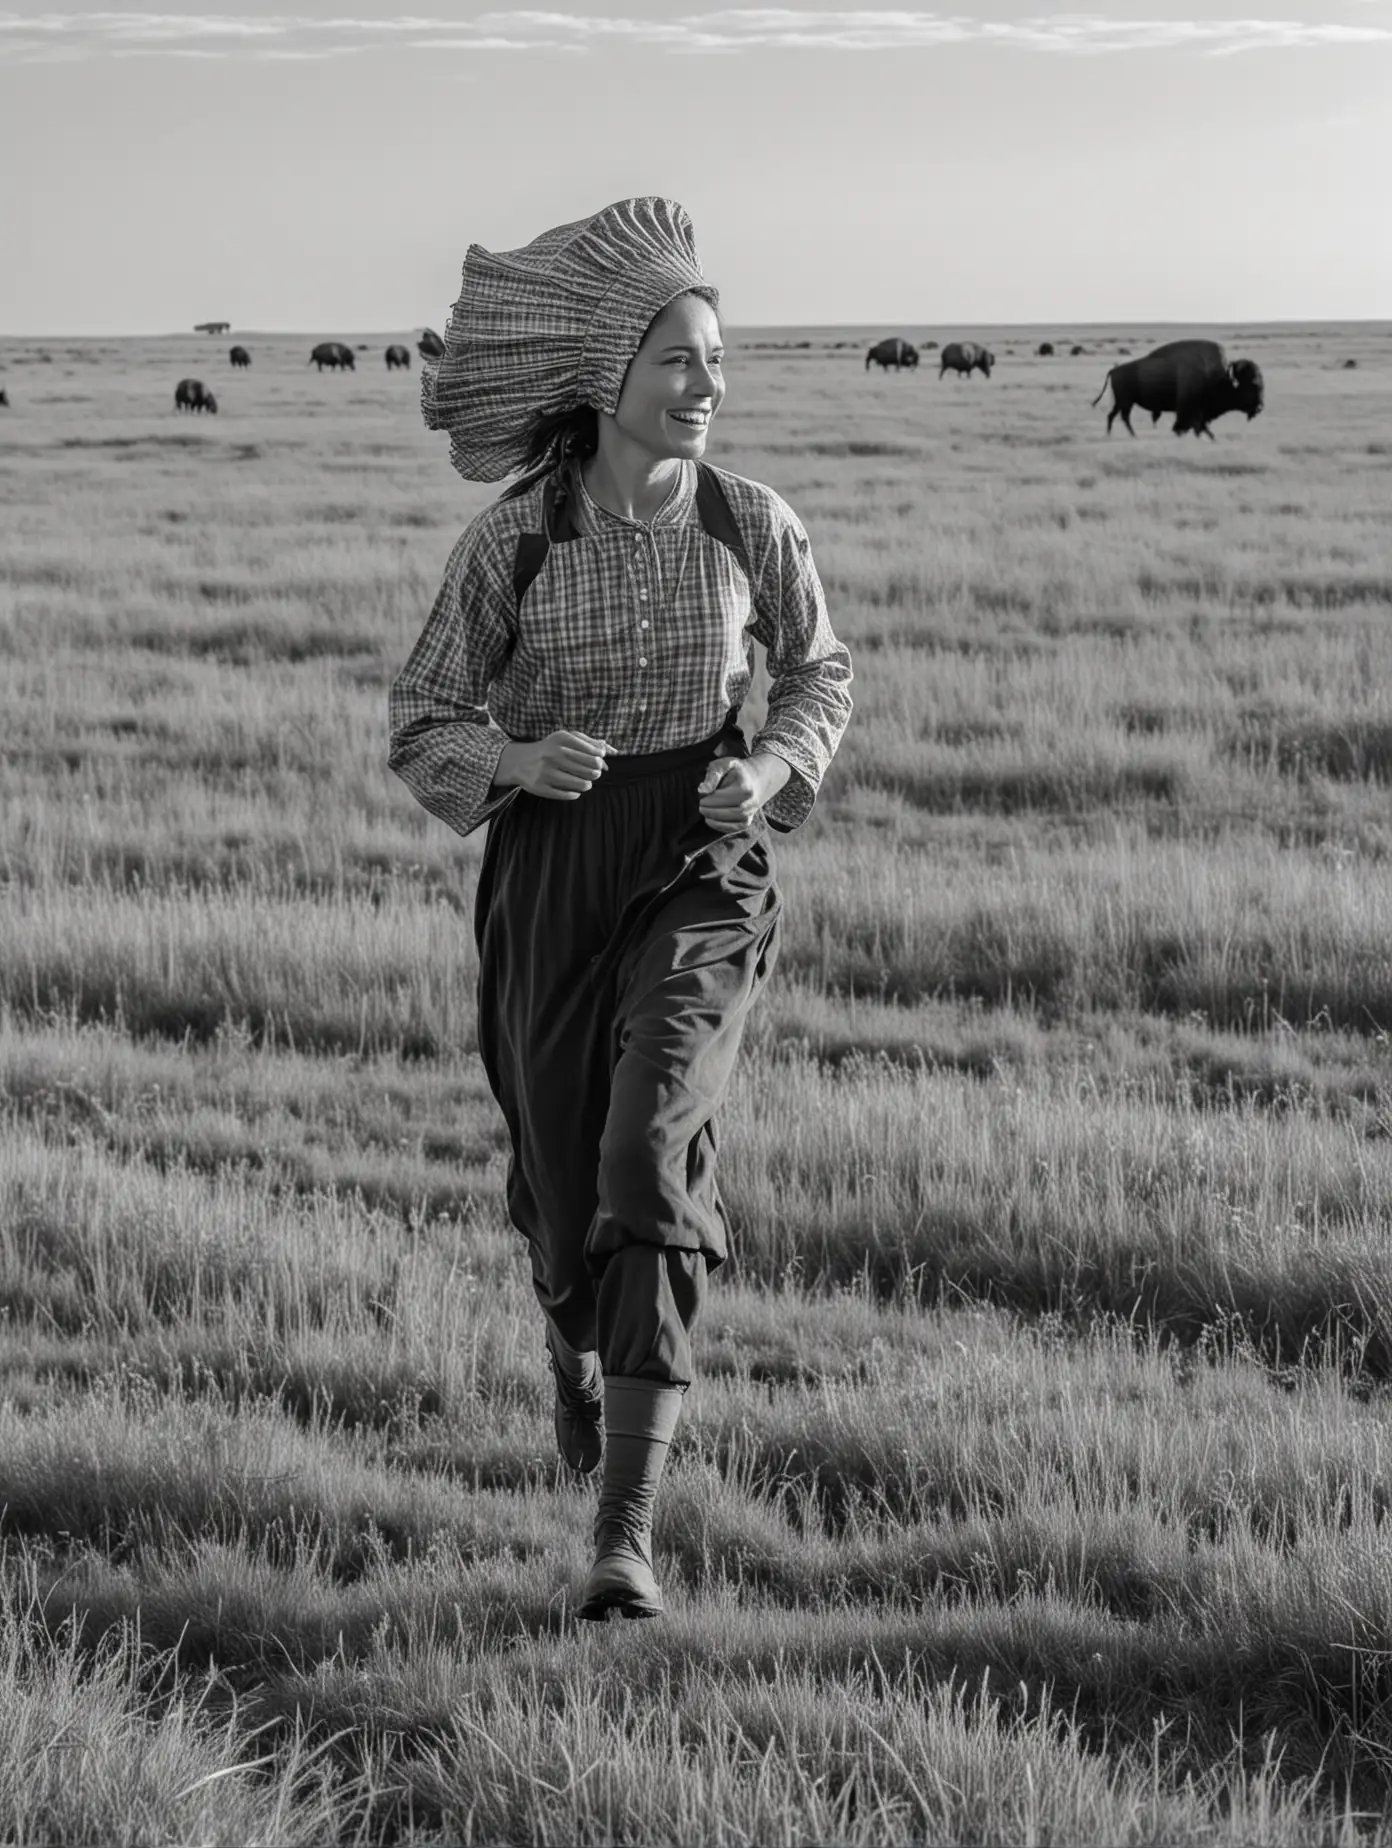 Pioneer Woman Running Across the Prairie with Buffalo in Black and White